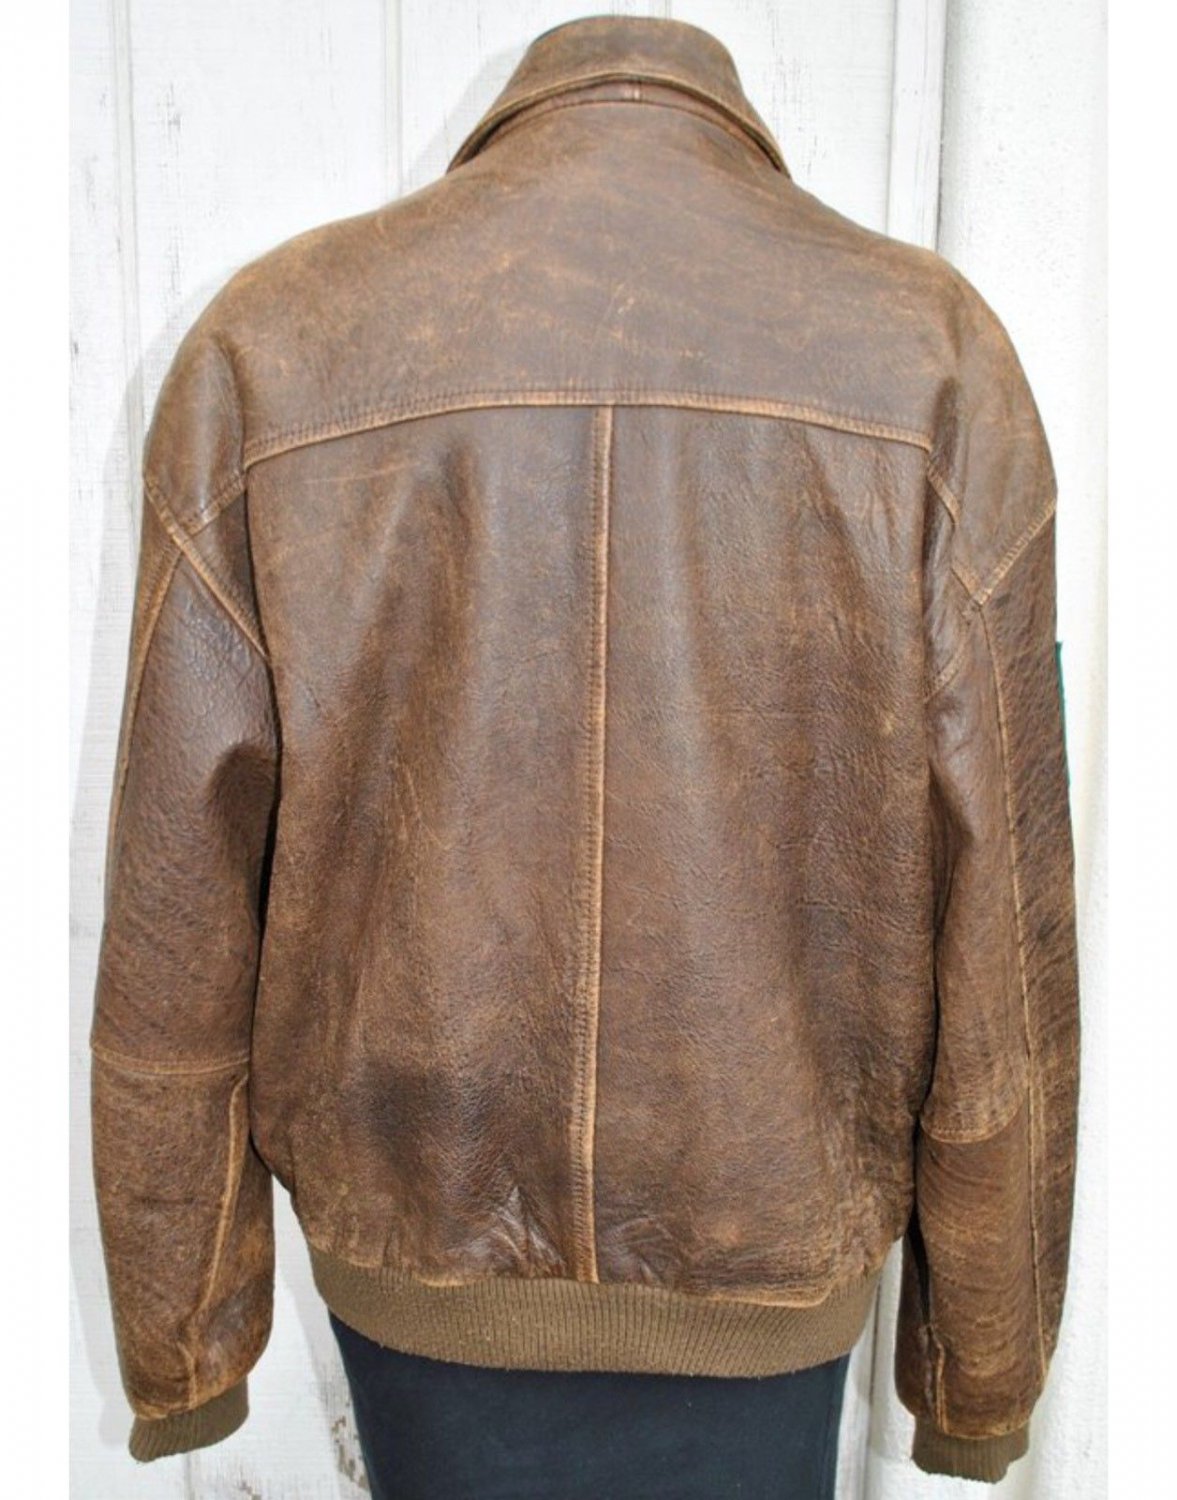 Vintage Mens Bomber Flight Jacket Patches Small Distressed Leather ...